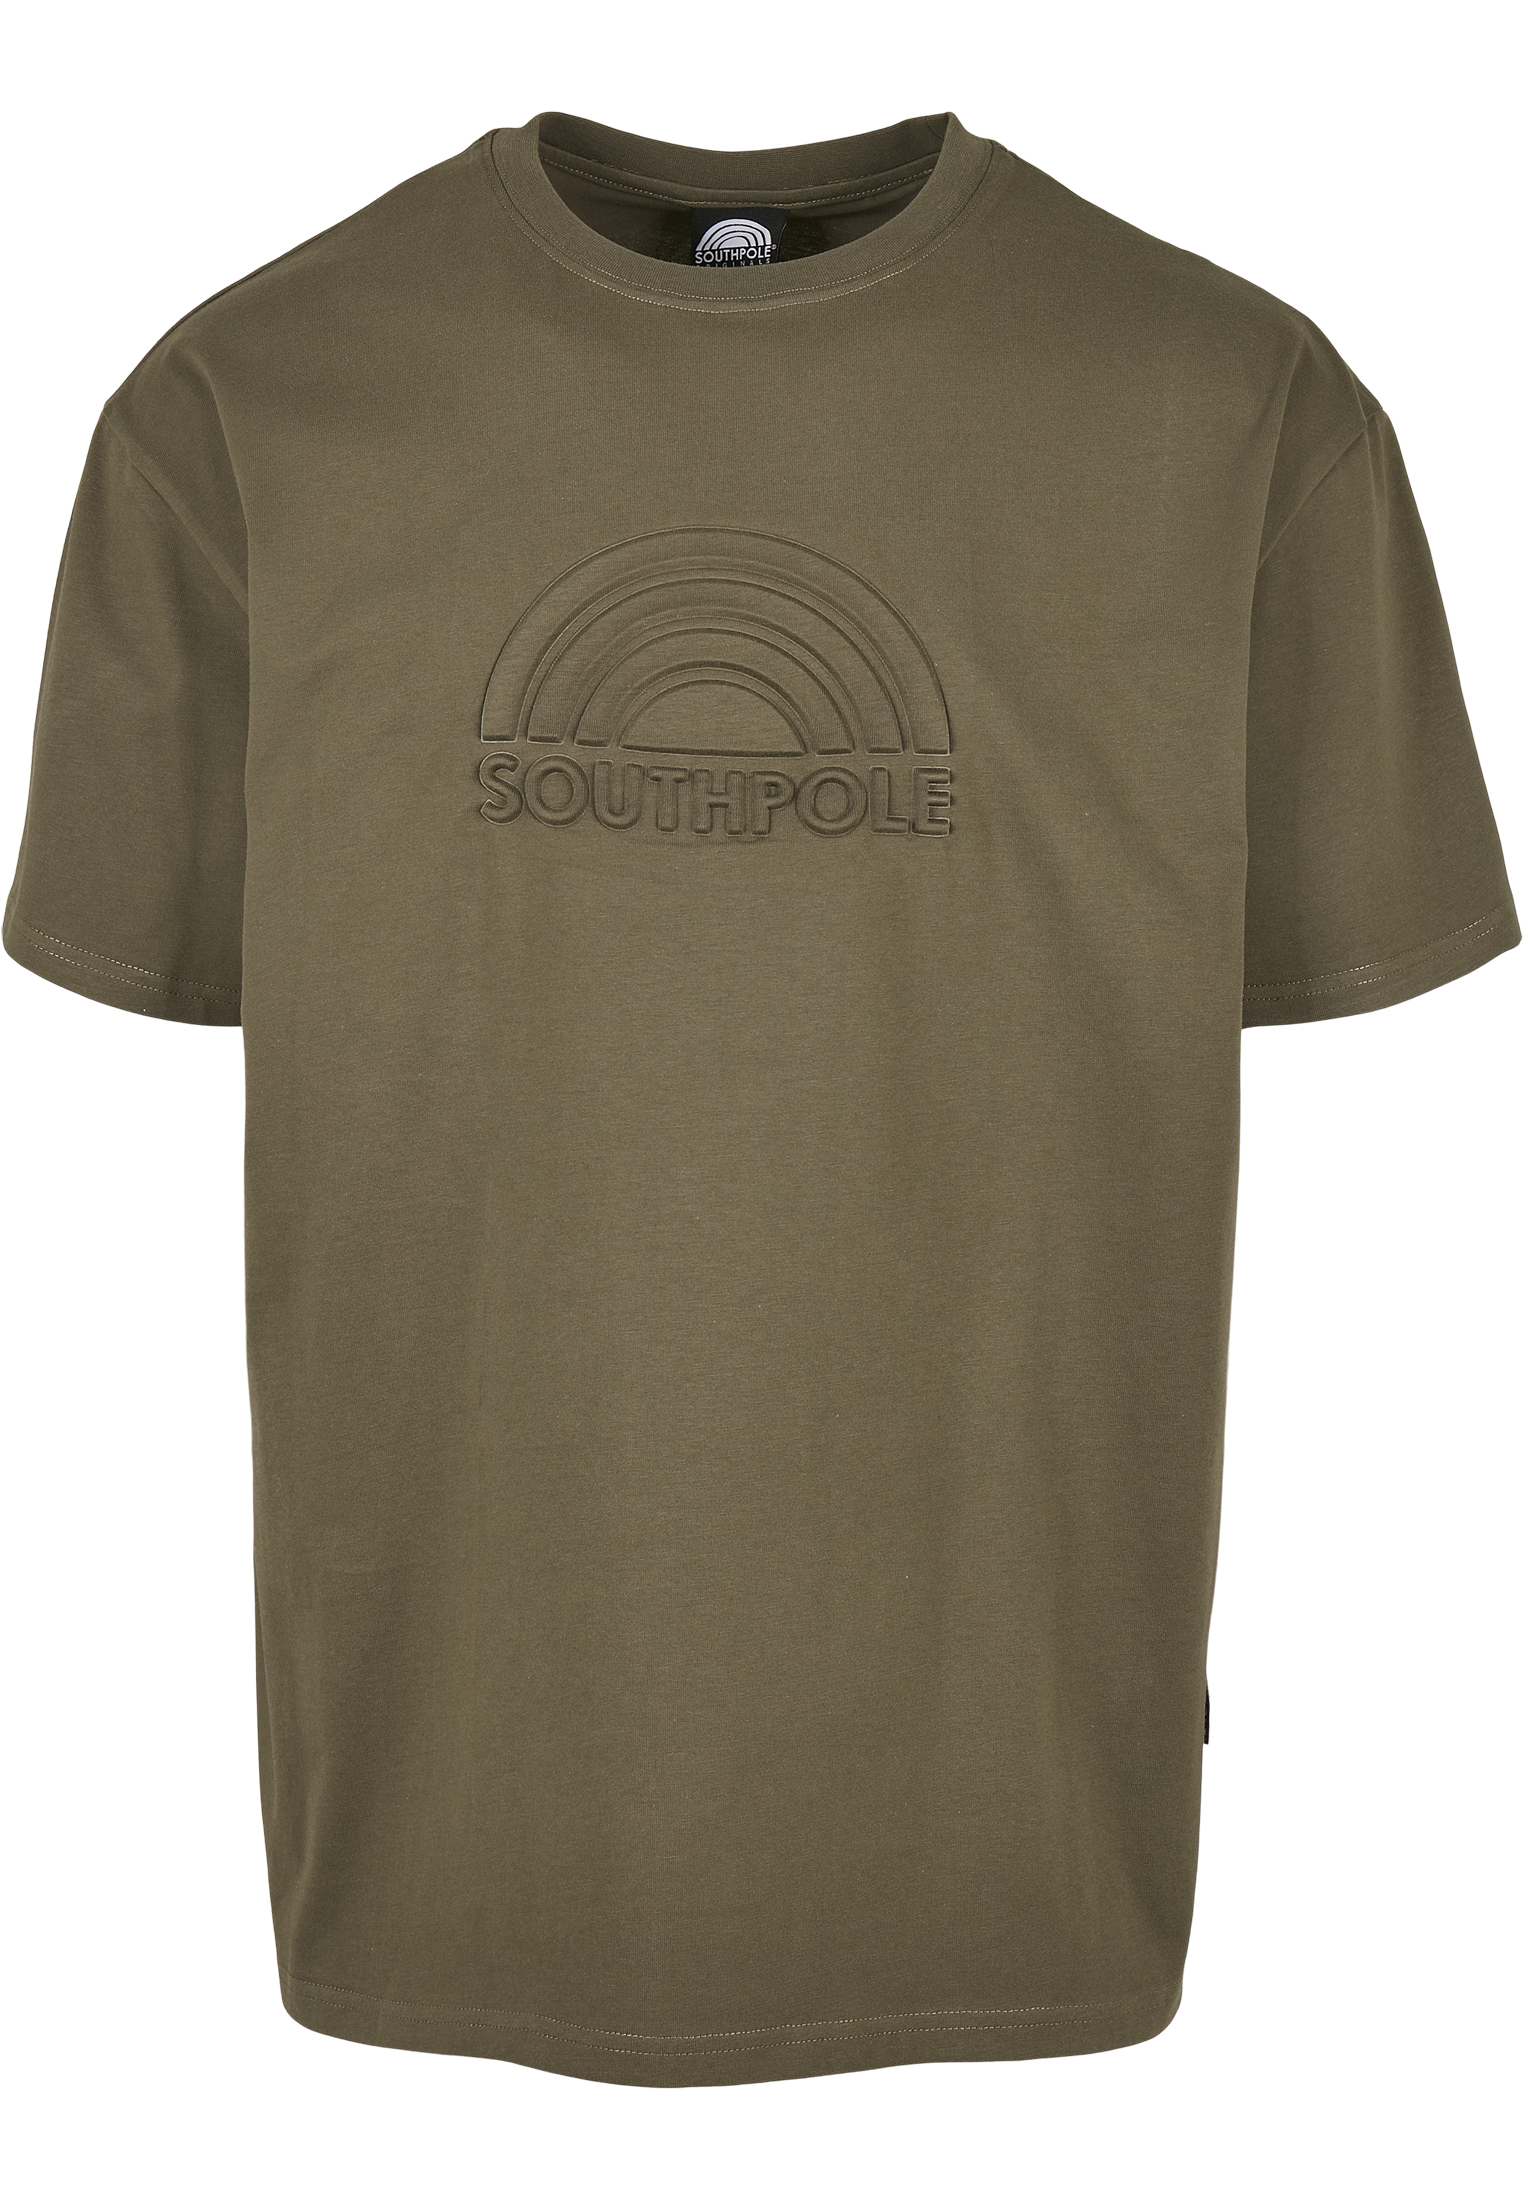 Nos Kollektion Southpole 3D Tee in Farbe olive